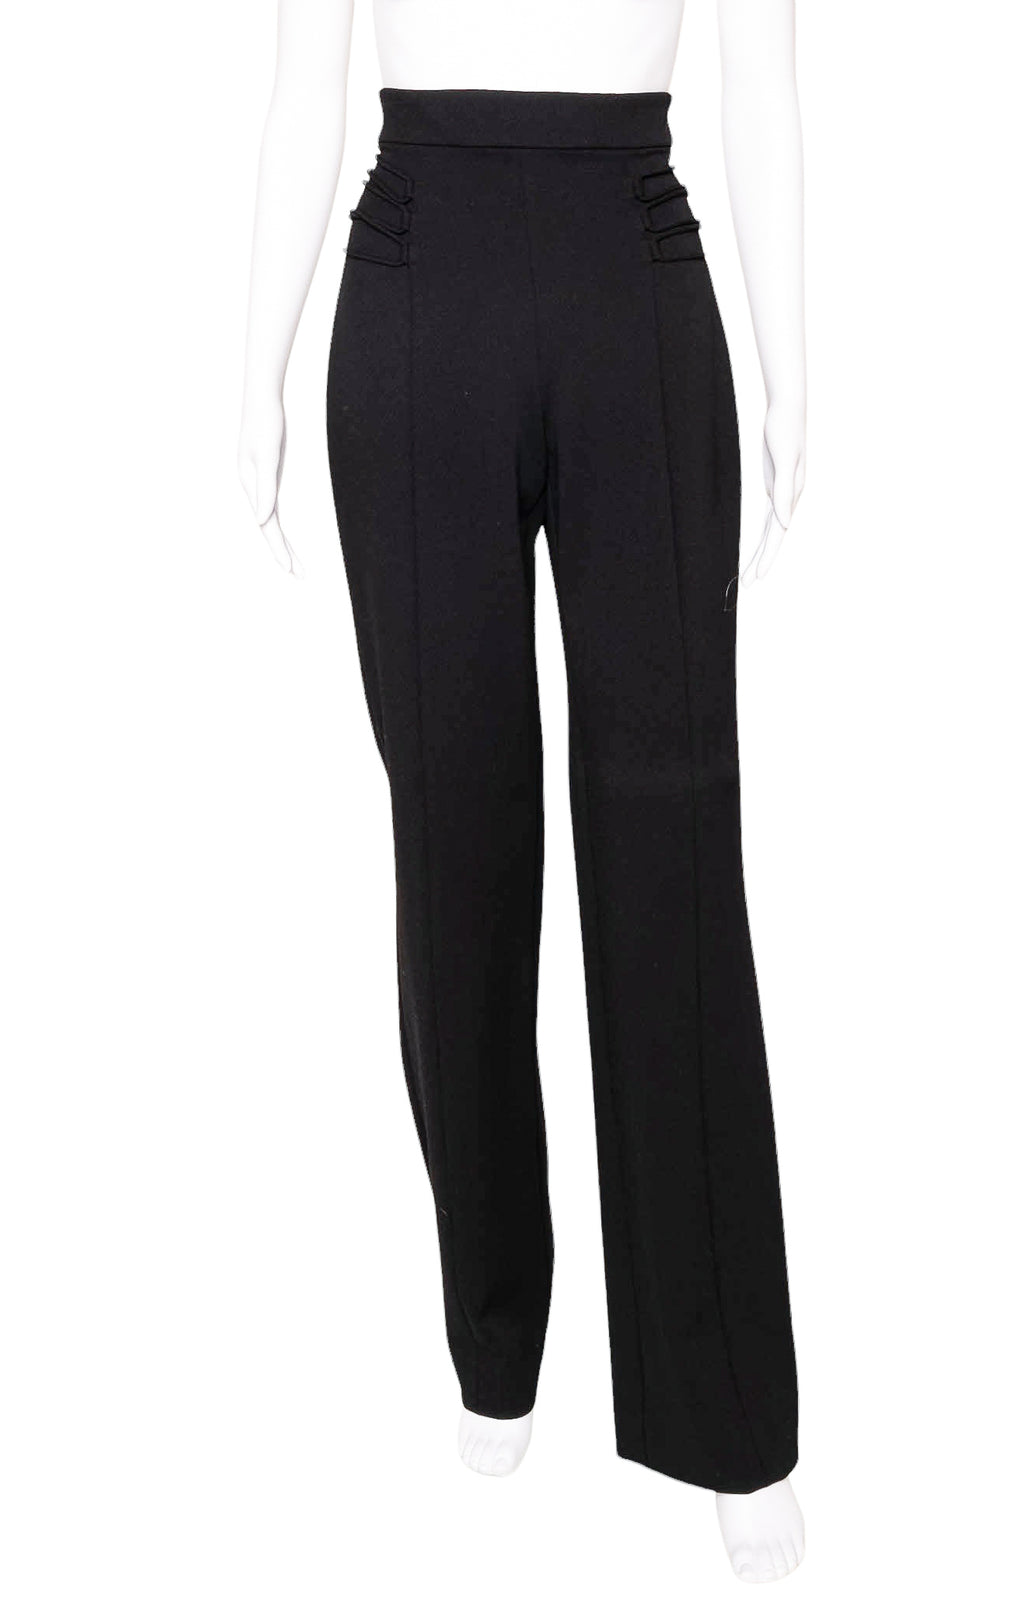 CUSHNIE ET OCHS (RARE & NEW) with tags Pants Size: US 6